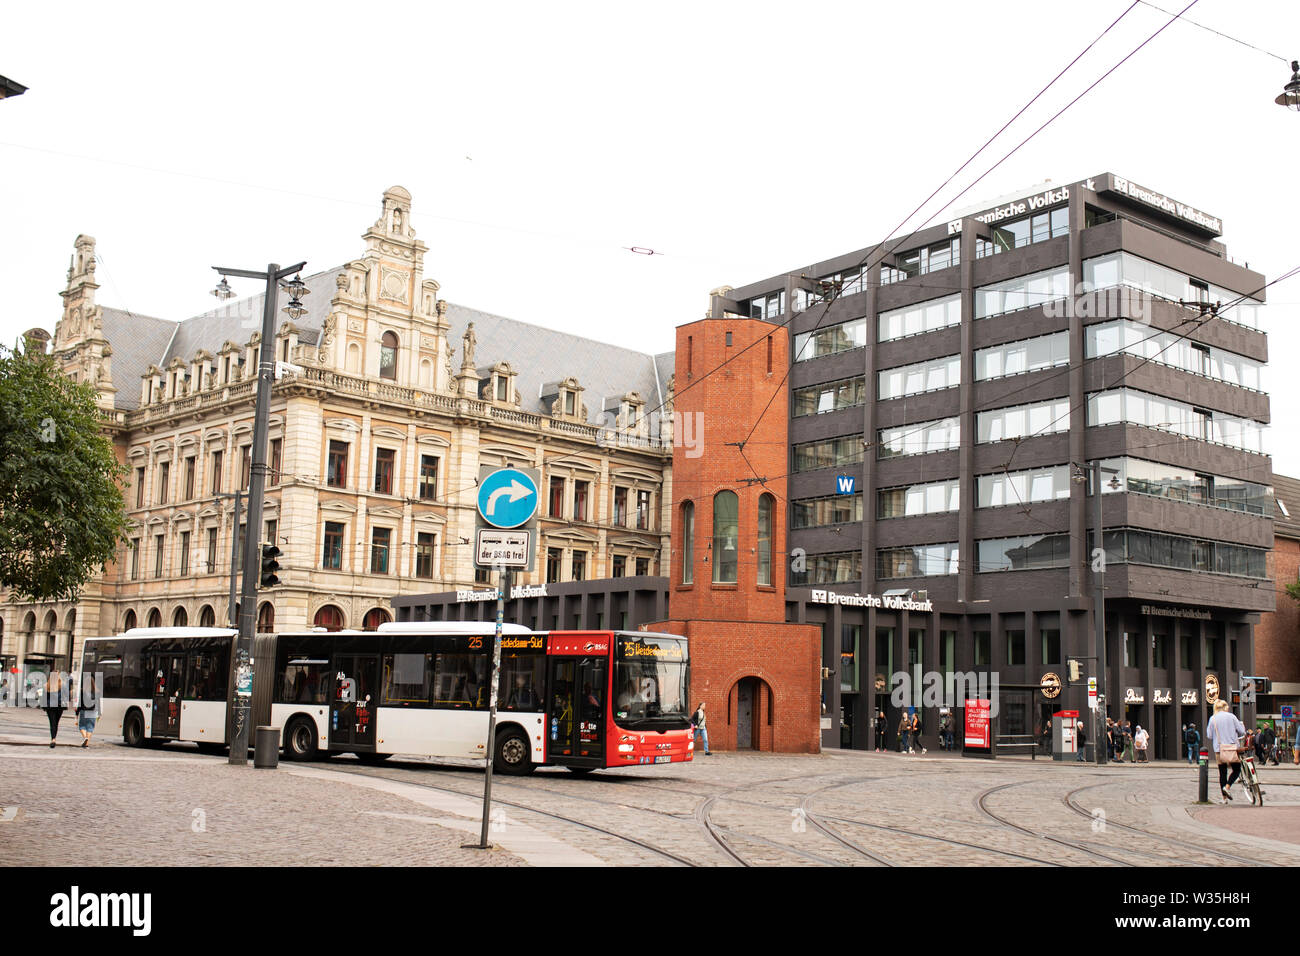 A city bus passing in front of the Bremische Volksbank and the Verkehrs-Turm traffic tower sculpture on Domsheide in central Bremen, Germany. Stock Photo